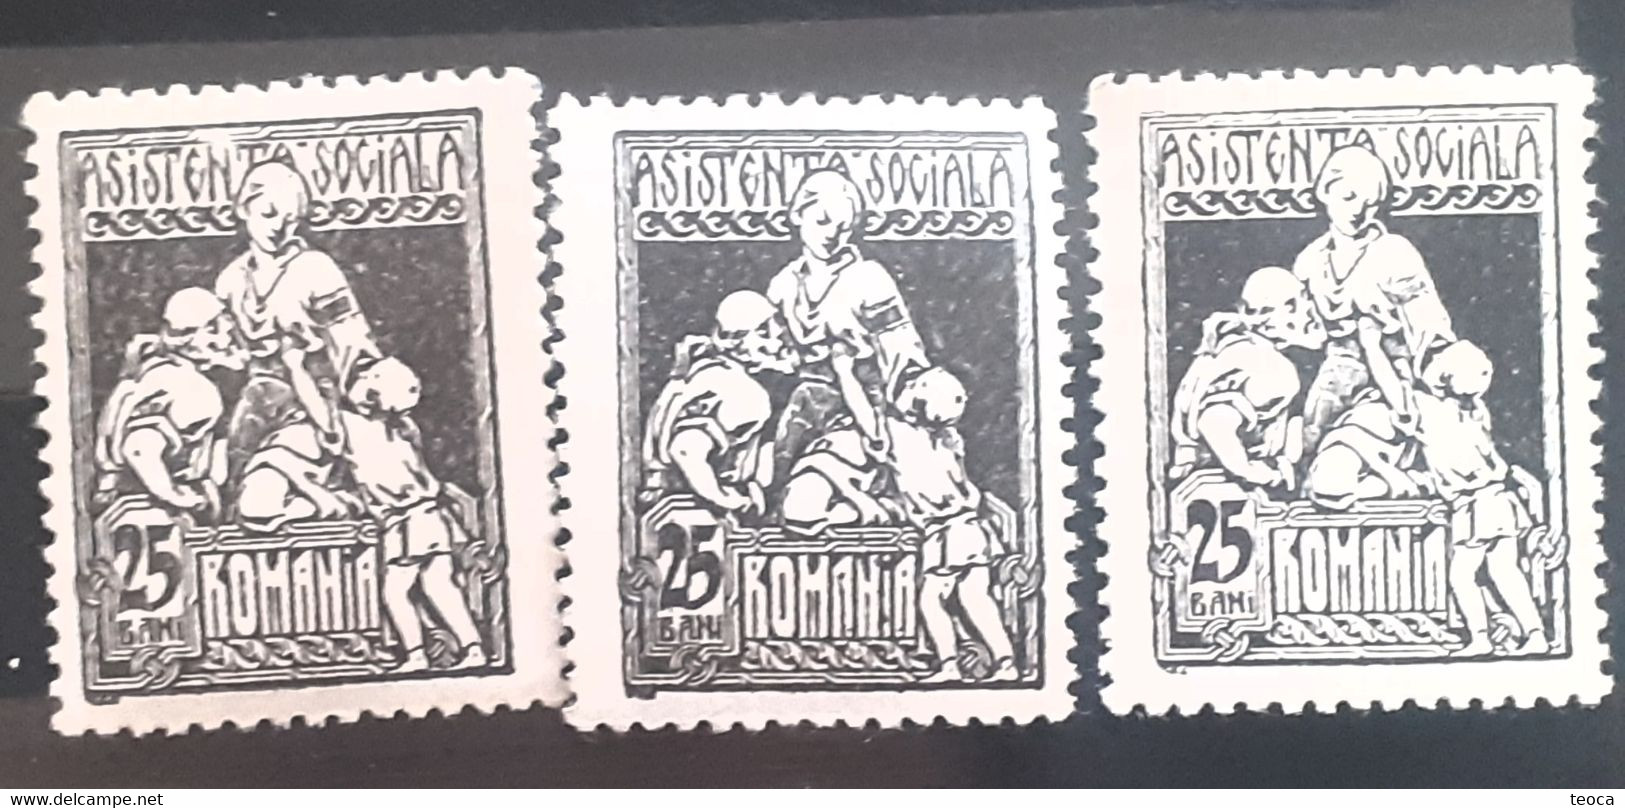 Errors Romania 1921, Social Assistance Printed With Multiple Errors,. 3 Stamps UNUSED - Variedades Y Curiosidades